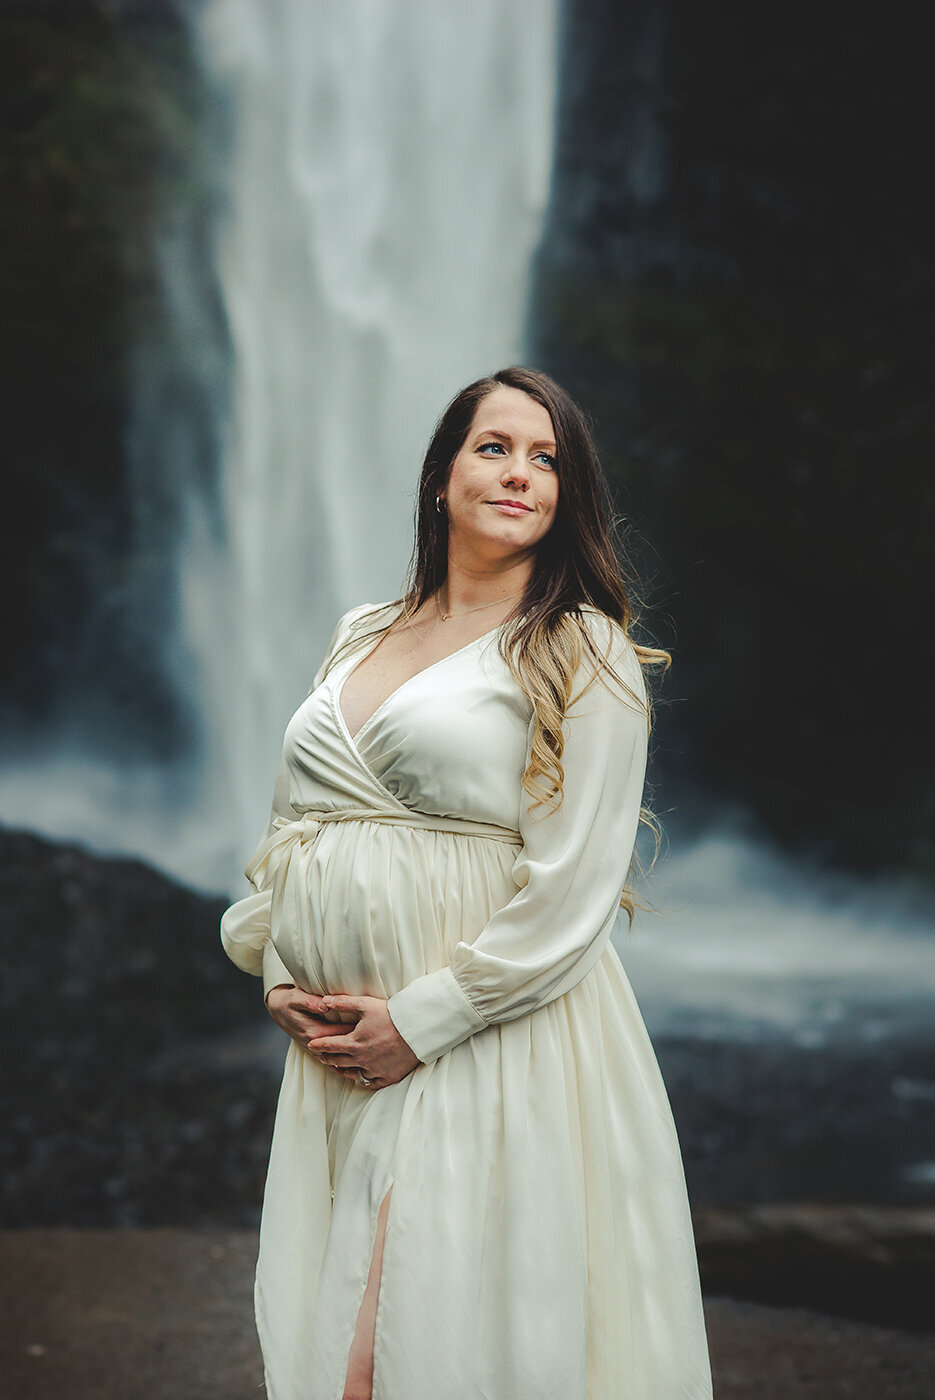 Pregnant woman and waterfall